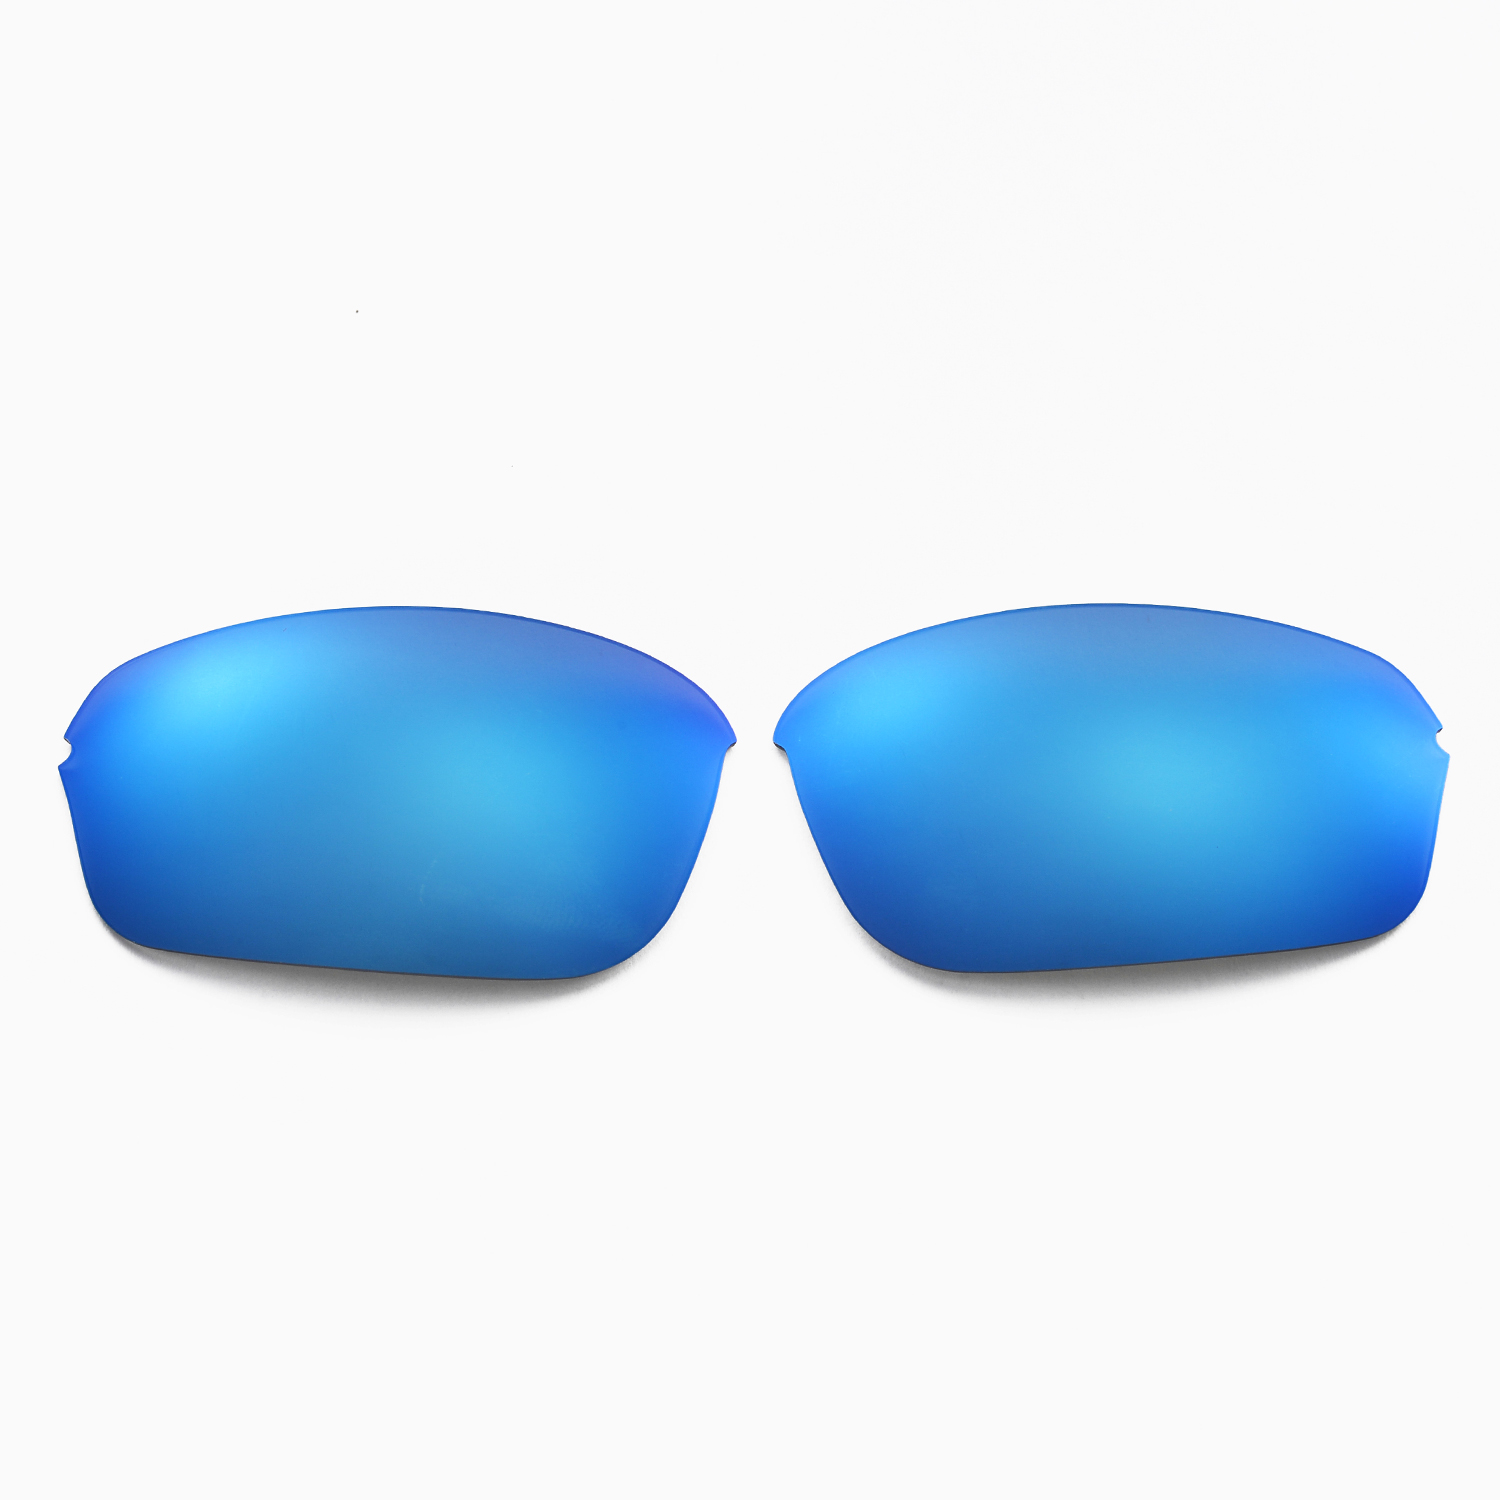 Walleva Ice Blue Polarized Replacement Lenses for Oakley Half Wire 2.0 Sunglasses - image 2 of 6